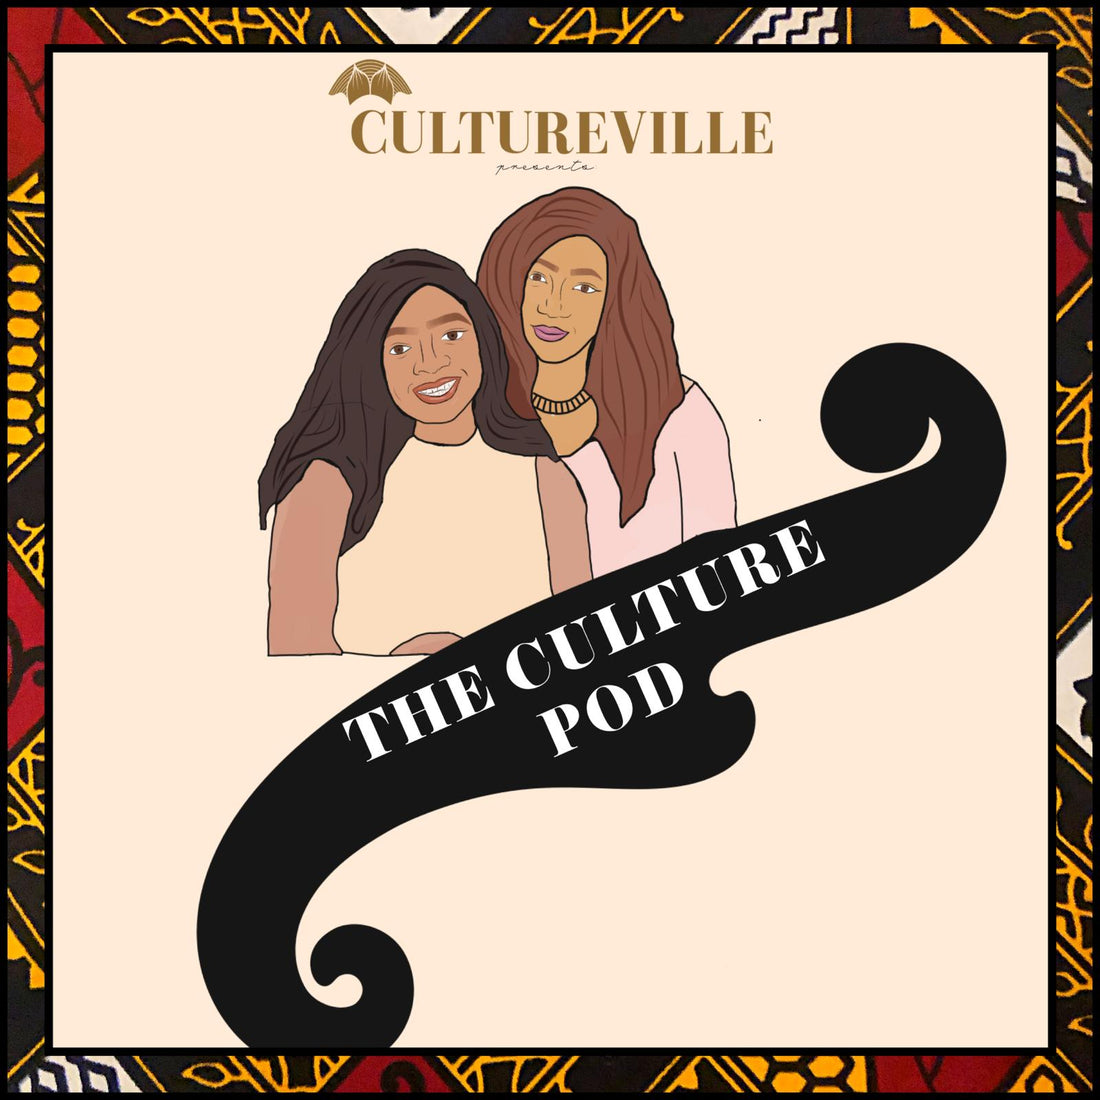 Culture Pod : Season 2 Episode 1 | The girls are back in town - Toxic traits, faith & deal breakers